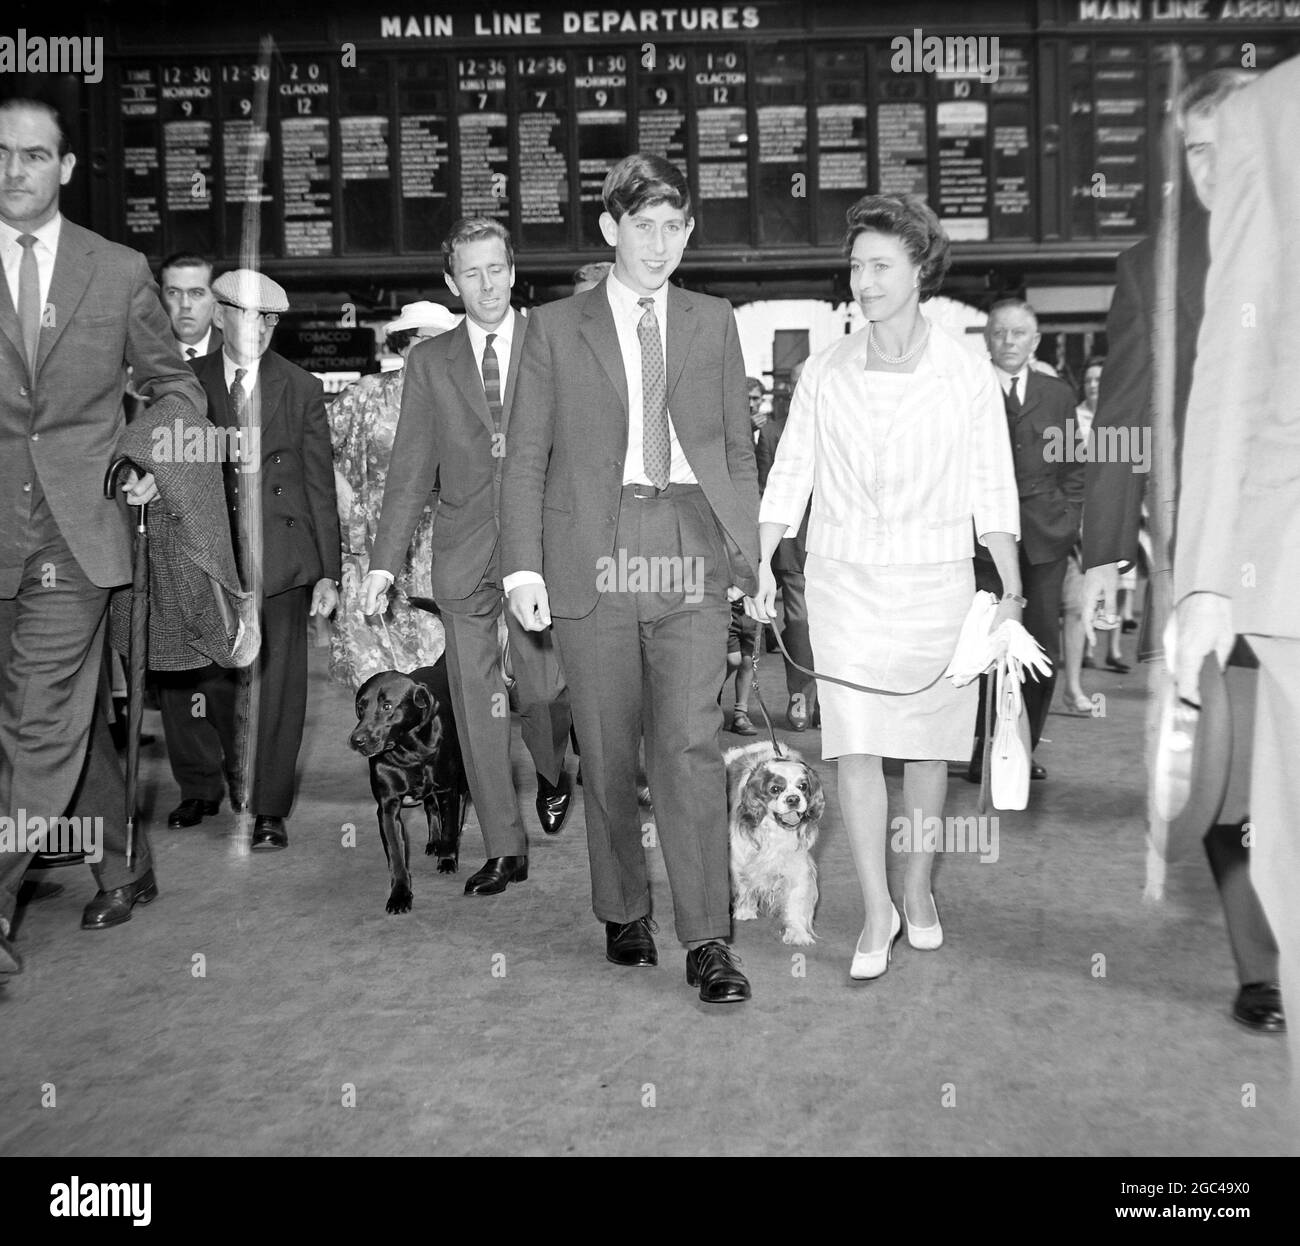 6 AUGUST 1963 PRINCE CHARLES WITH PRINCESS MARGARET AND HER KING CHARLES SPANIEL ROLEY FOLLOWED BY LORD SNOWDON AT LIVERPOOL STREET STATION IN LONDON, ENGLAND. Stock Photo